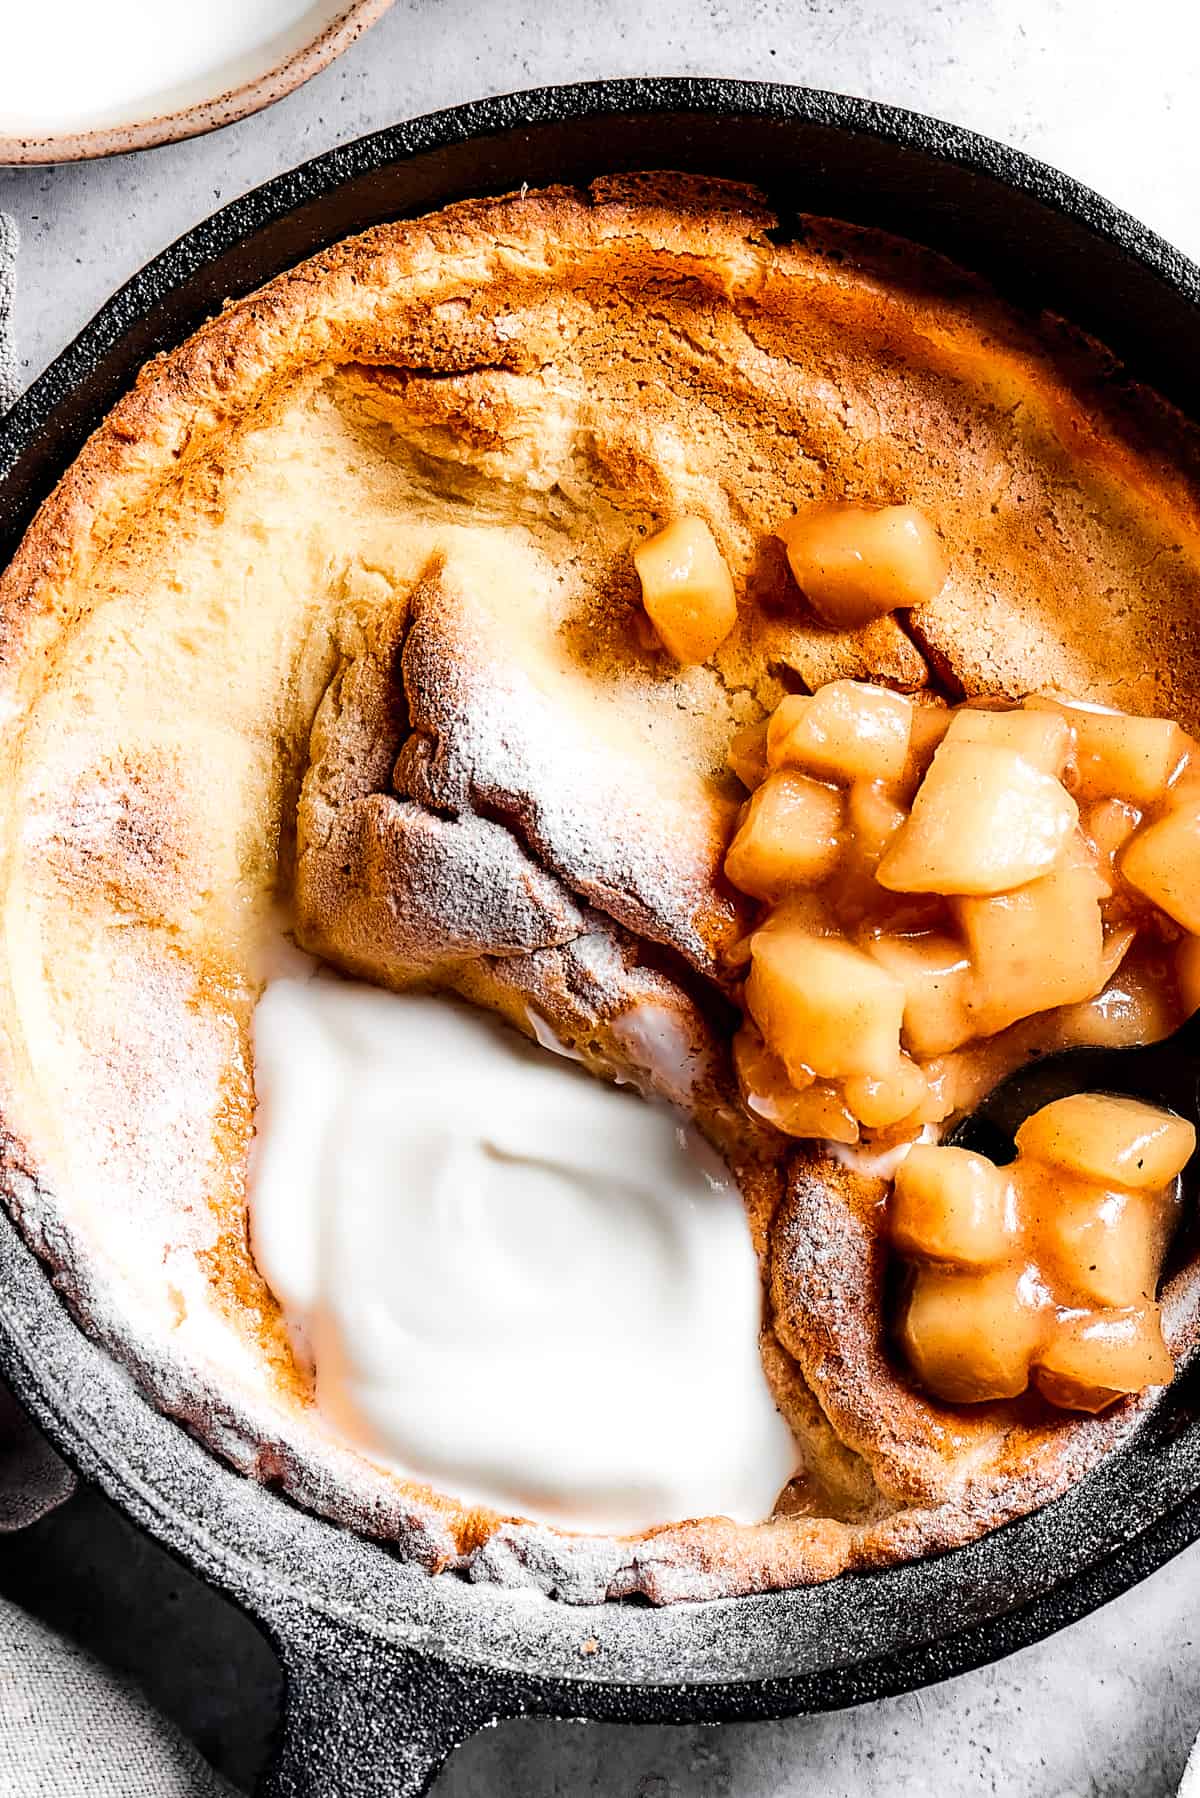 A skillet pancake with apples and creamy topping.